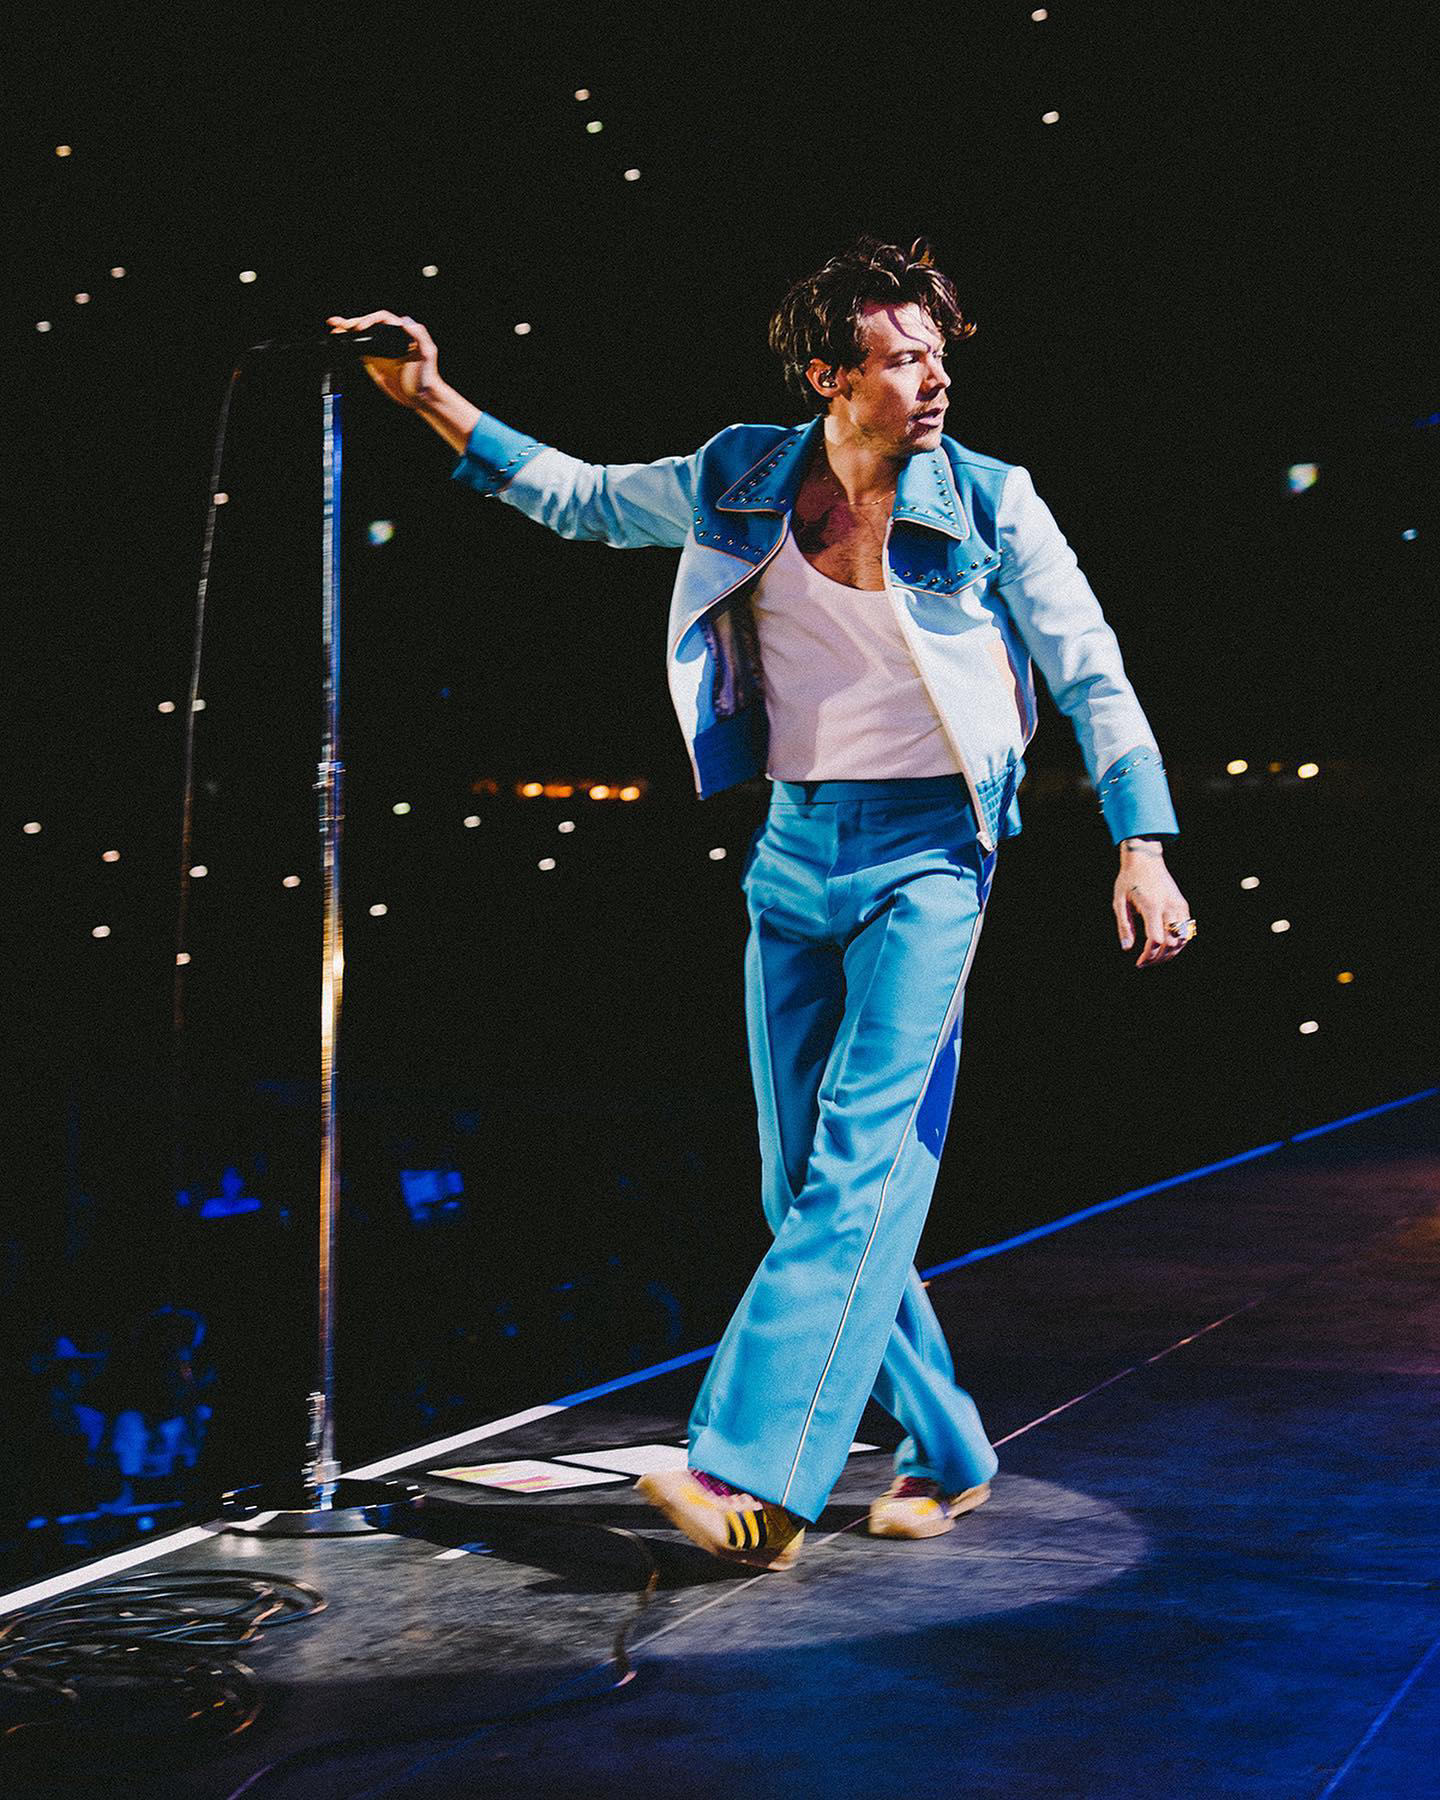 In custom Gucci, Harry Styles is captured on stage during his ‘Love on Tour’ show in Melbourne